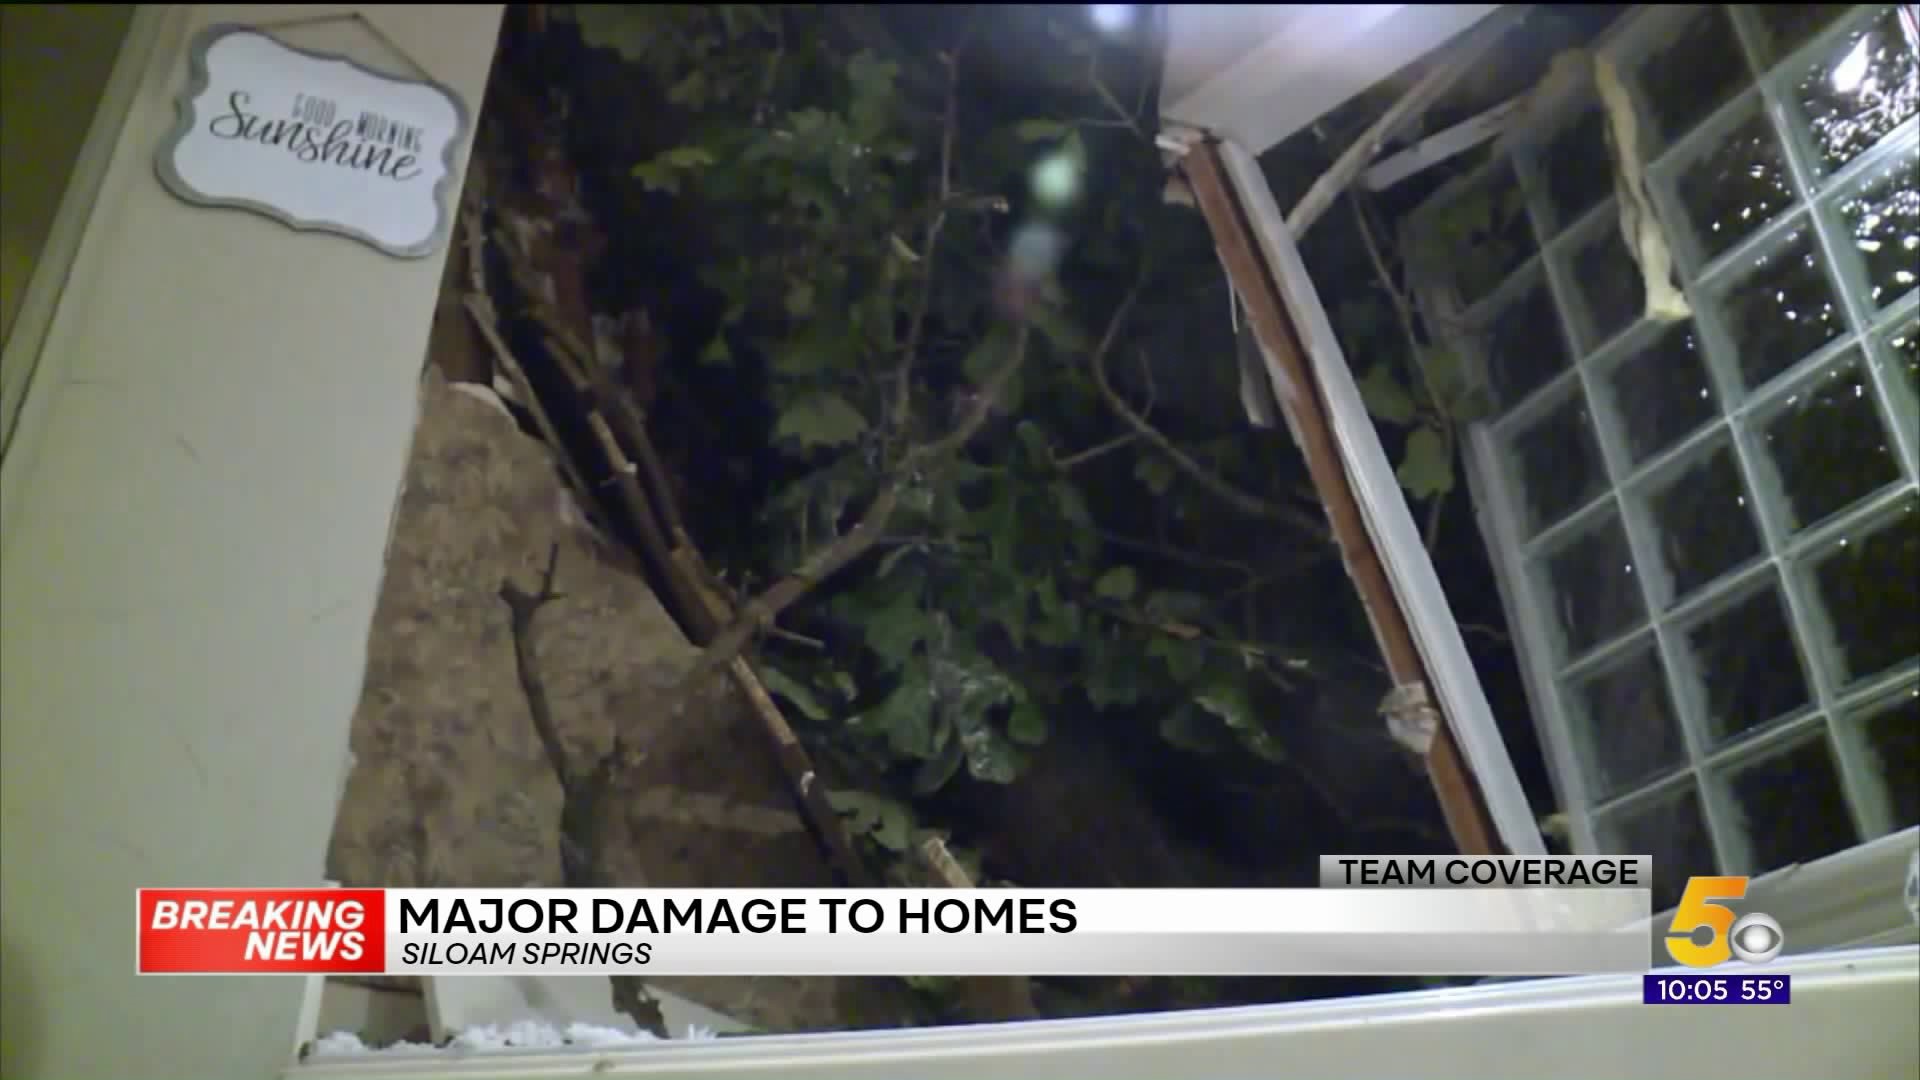 Major Damage to Homes in Siloam Springs